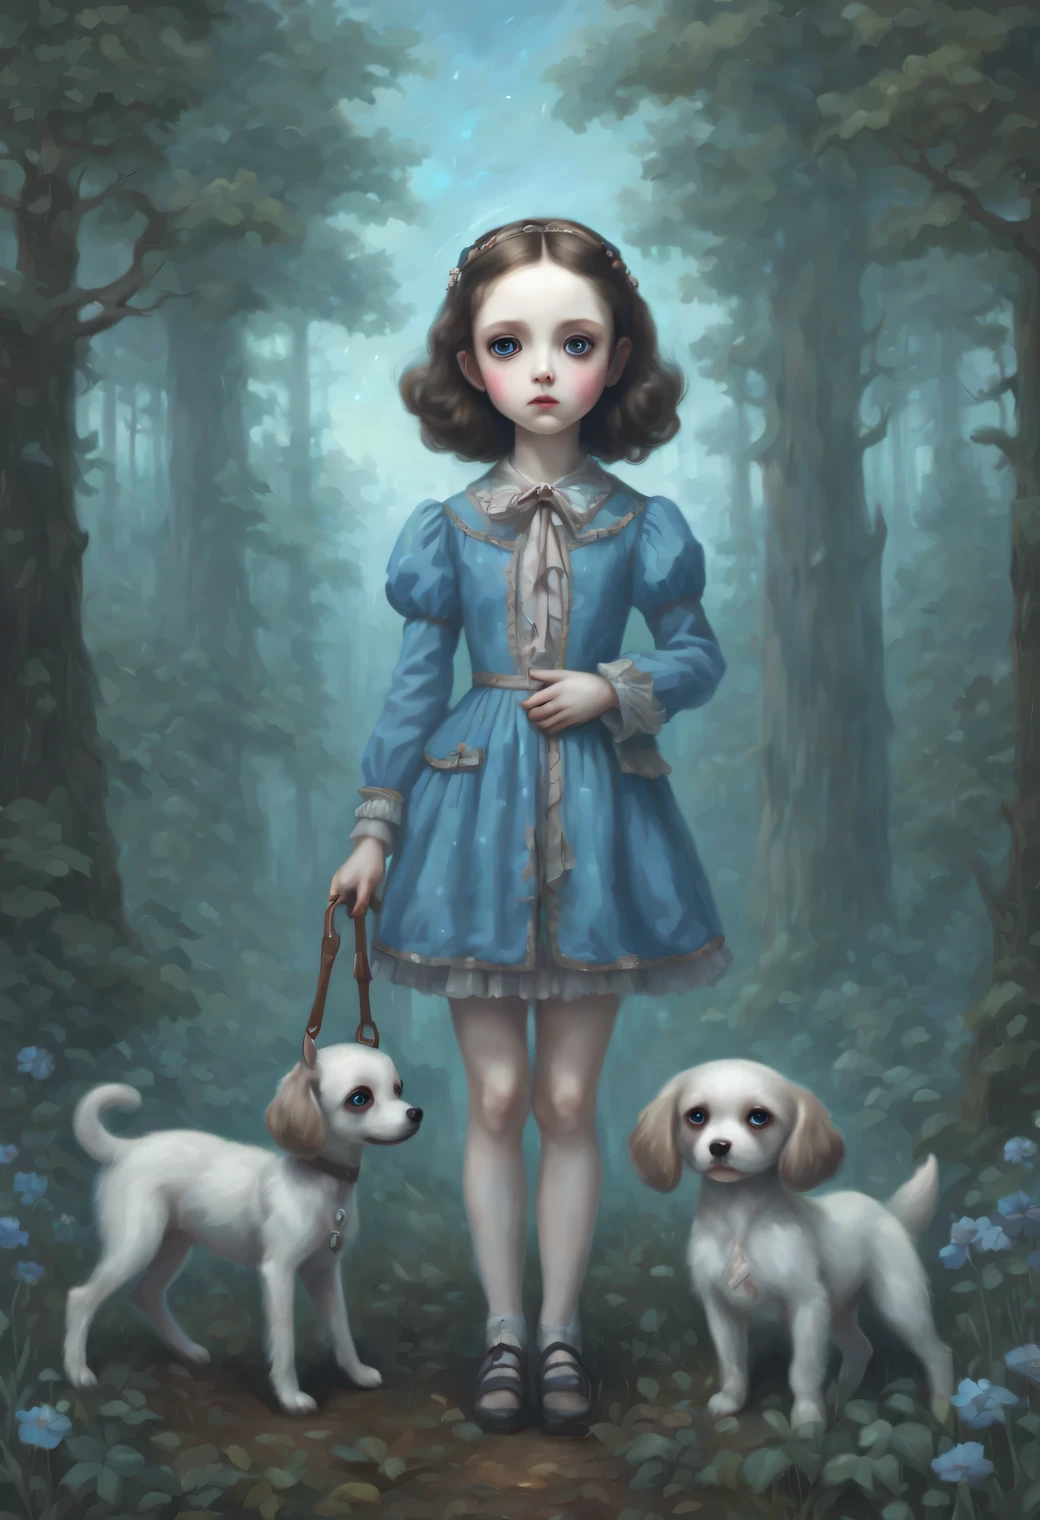 The neural network draws a picture against the backdrop of a glowing blue forest of another unknown world, heroic creature - a girl of an unknown alien life form with big blue eyes in beautiful clothes, walking a small alien puppy on a leash against the backdrop of an alien glowing forest, the alien girl looks unusual and majestic, beautiful alien clothes, slim tall build, long legs, glowing blue eyes, A high resolution, High detail, clarity 32 thousand., A high resolution, -bit color depth, Oil Painting Effect Painting, (Mark Ryden: 1.5155), (Xue Wang: 1.1155), bulk, Beautiful Image, High detail